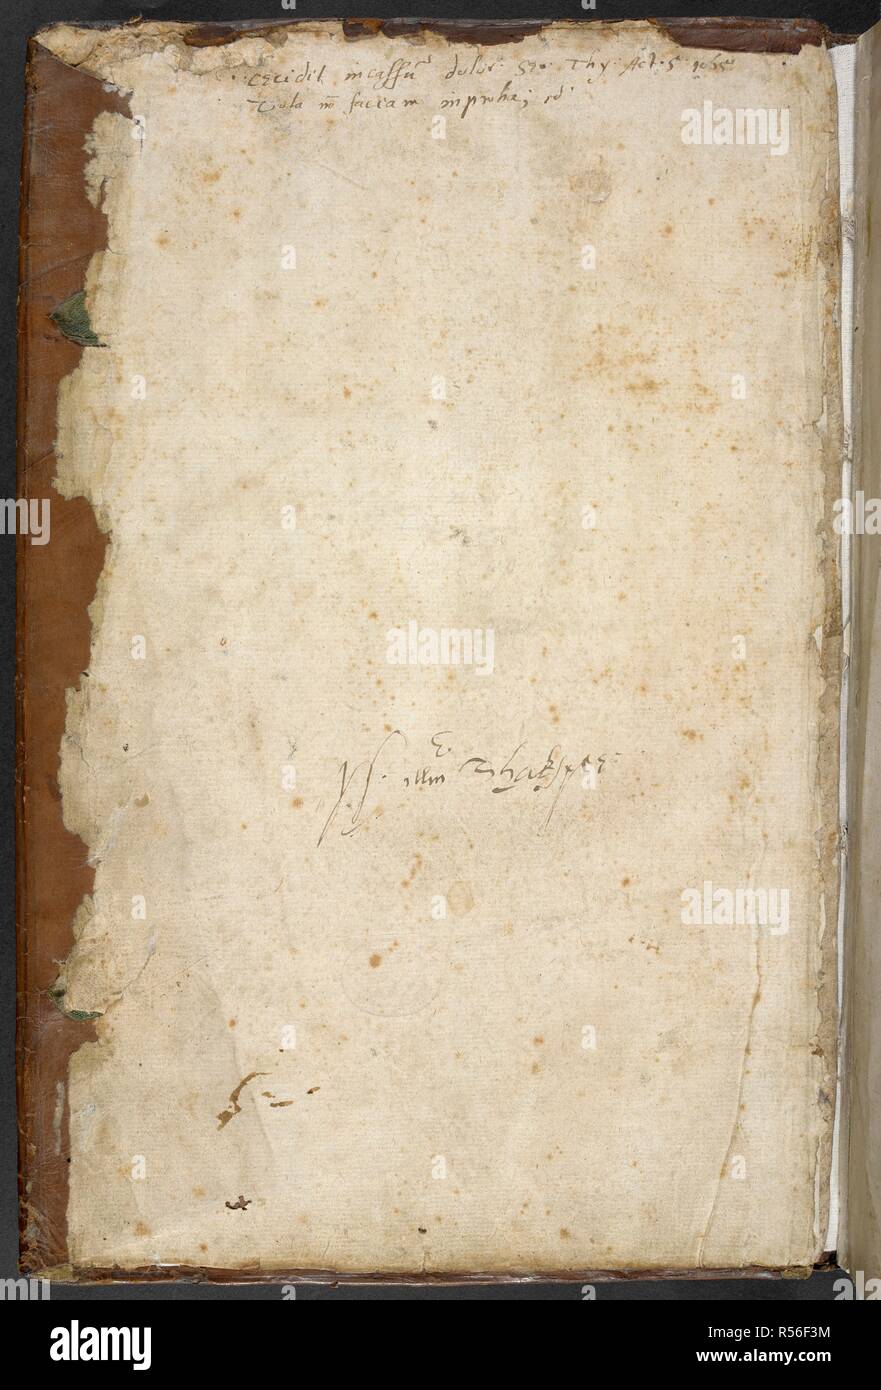 This signature purports to be that of Willam Shakespeare, but that is often disputed between this and other verifiable autographs. The Essayes, or Morall, Politike, and Millitarie Discourses of Lo: Michaell de Montaigne ... Now done into English by ... John Florio. Few MS. notes [in pencil]. London : V. Sims, 1603. Source: C.21.e.17, front flyleaf. Language: English. Stock Photo